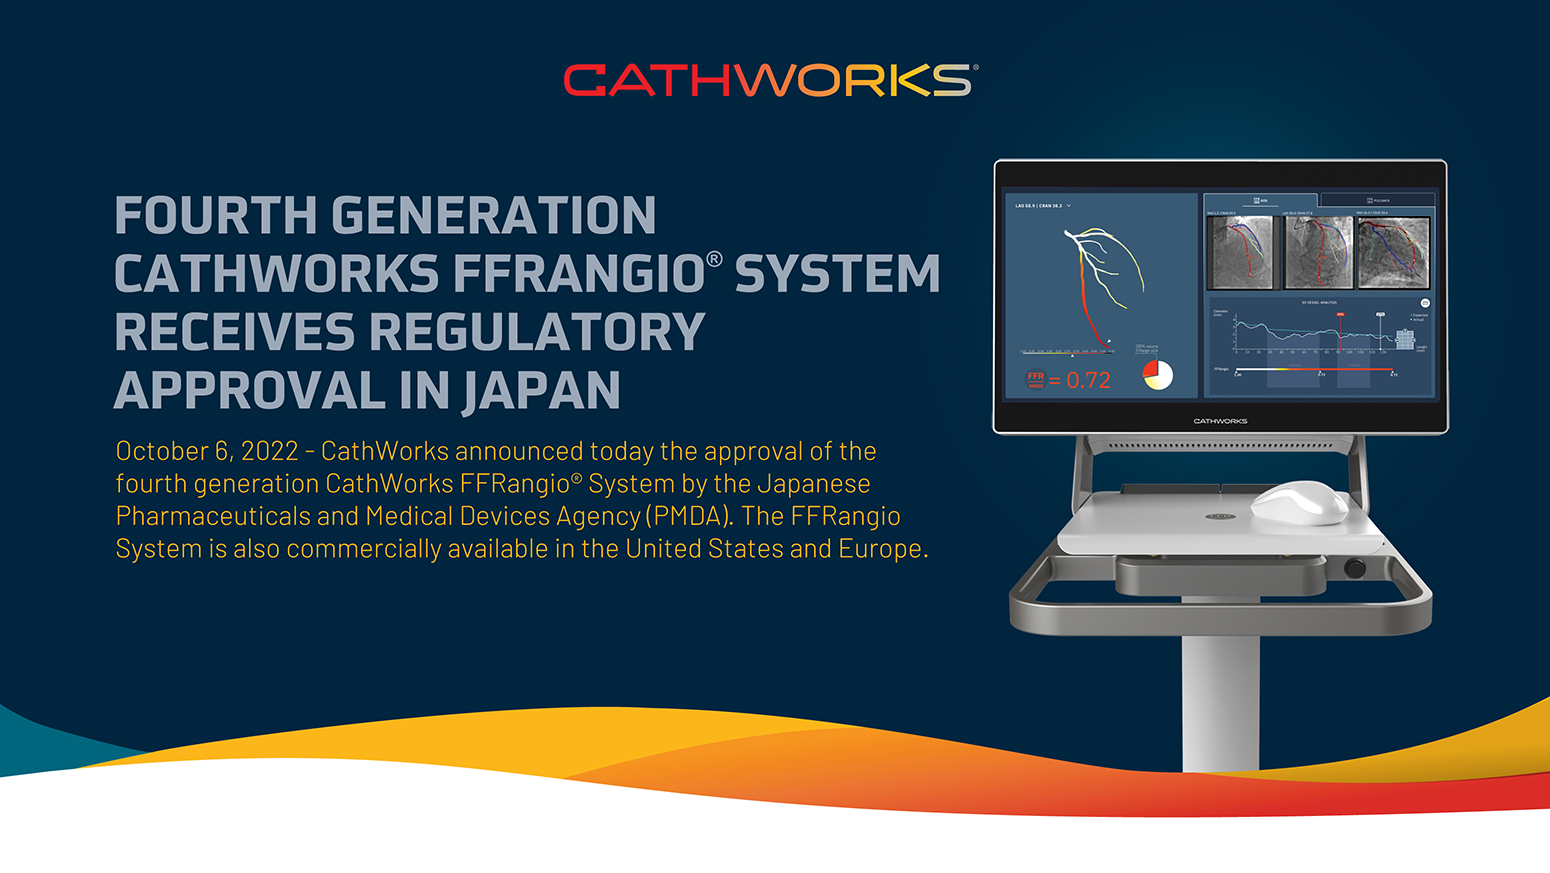 4th generation FFRangio System receives regulatory approval in Japan